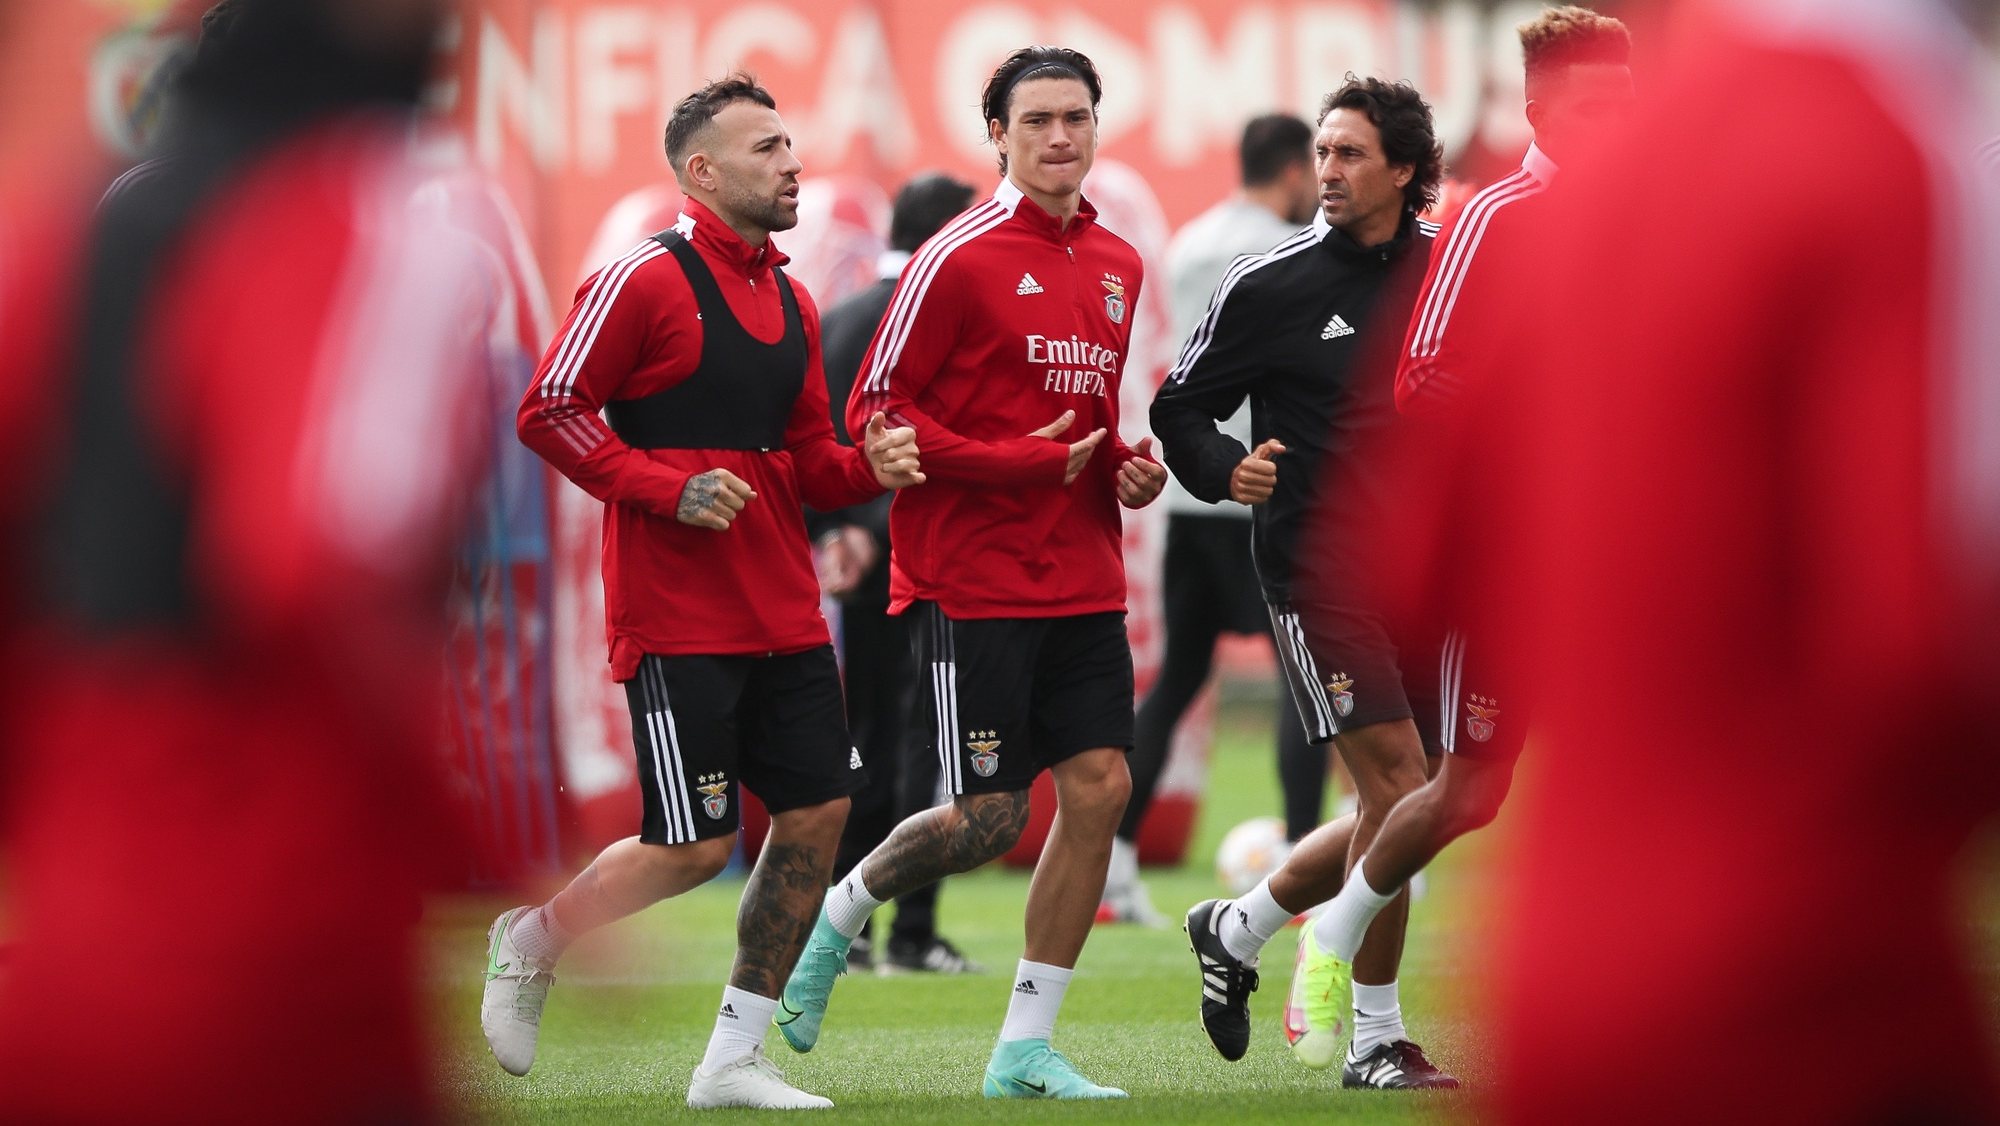 epa09557472 Benfica players Darwin Nunez (C) and Nicolas Otamendi (C-L) attend their team&#039;s training session at Benfica&#039;s training camp in Seixal, Portugal, 01 November 2021. Benfica Lisbon will face Bayern Munich in their UEFA Champion League group E soccer match on 02 November 2021.  EPA/MARIO CRUZ